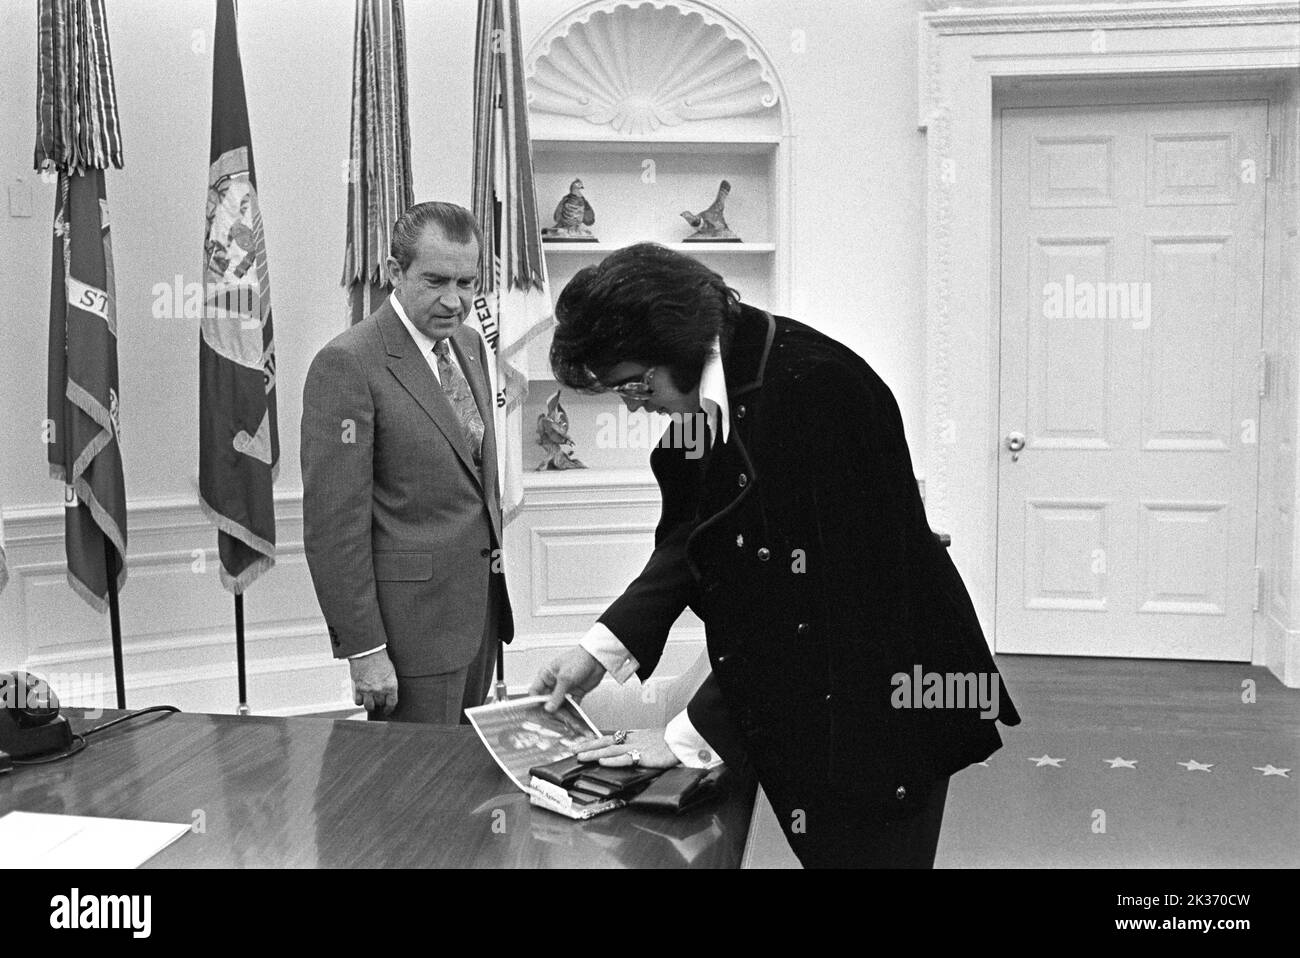 Richard Nixon and Elvis Presley in the Oval Office on December 21, 1970 - Elvis is showing his family photos. Stock Photo